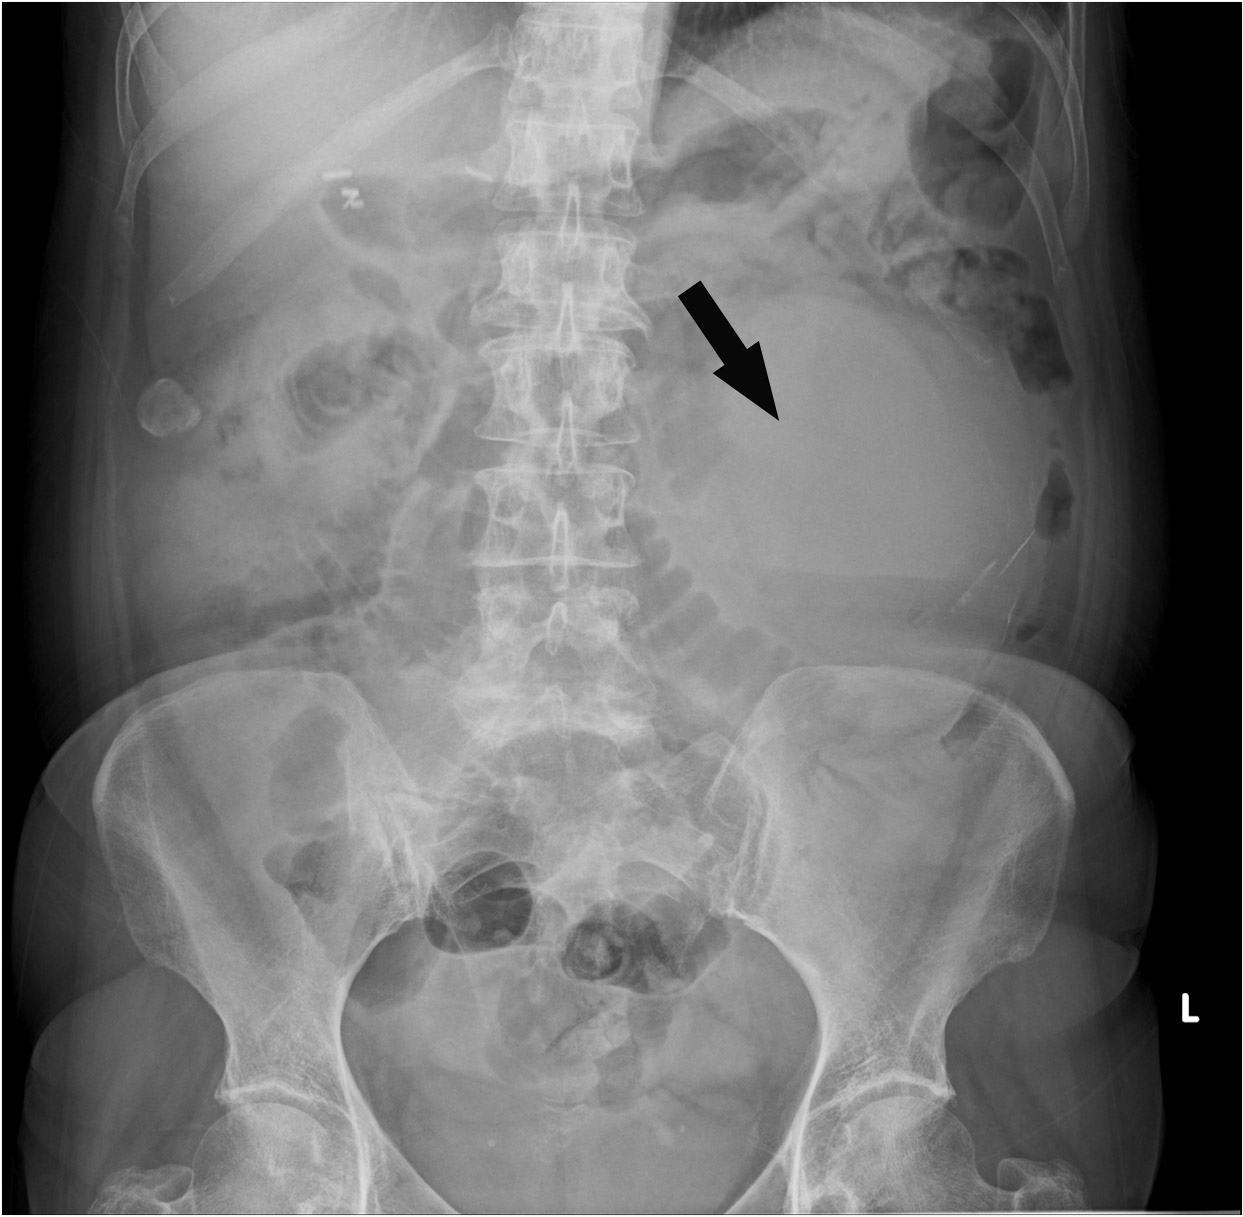 A large renal cyst seen on xray 